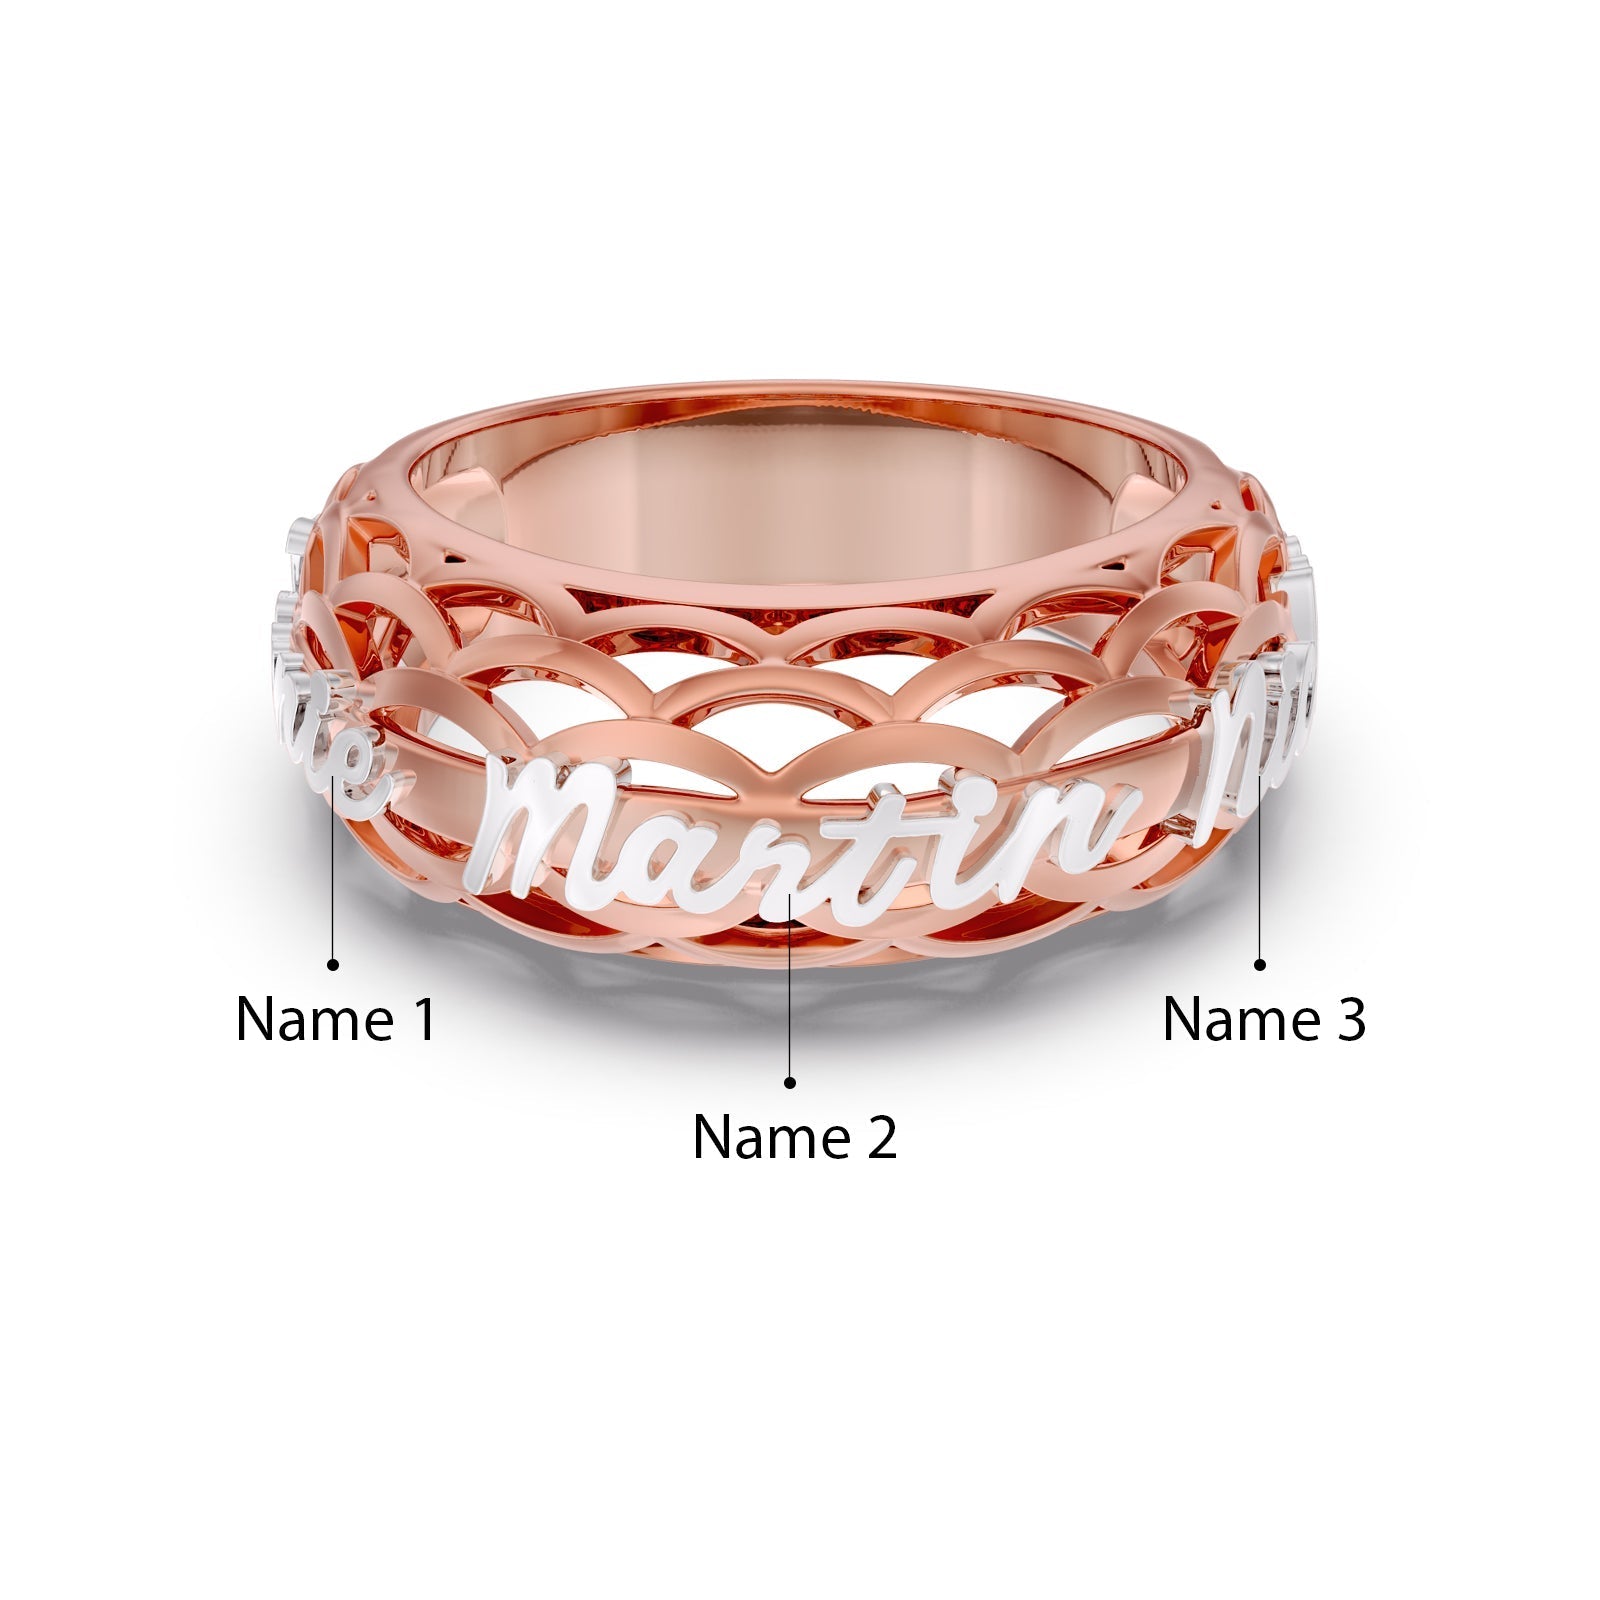 ThinkEngraved Father's Ring 4 / 14k rose gold and sterling silver Personalized Father's Dad Ring 3 Cut-Out Kids Names